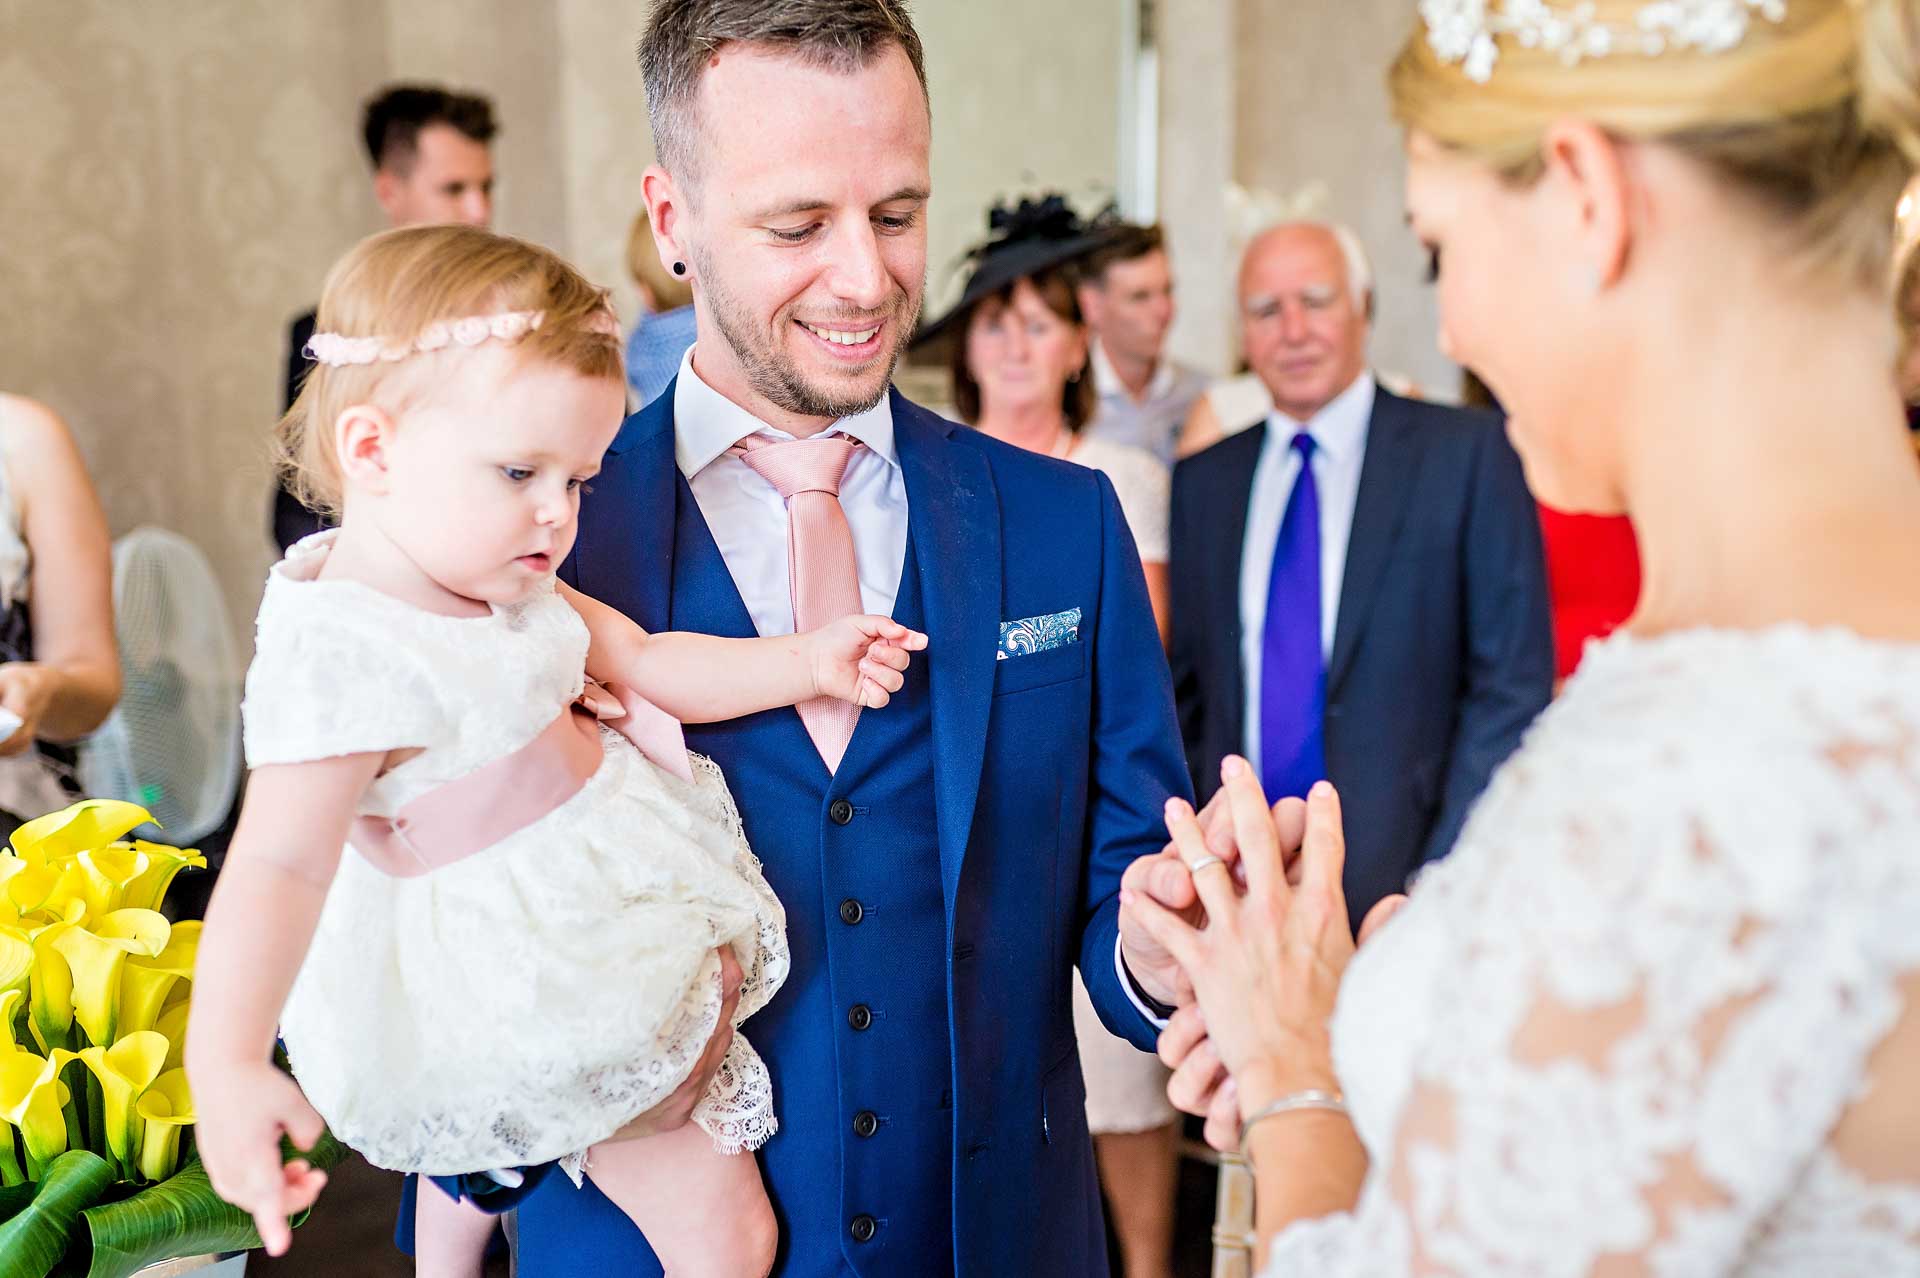 Groom Holding Baby and Placing Ring on Bride's Finger